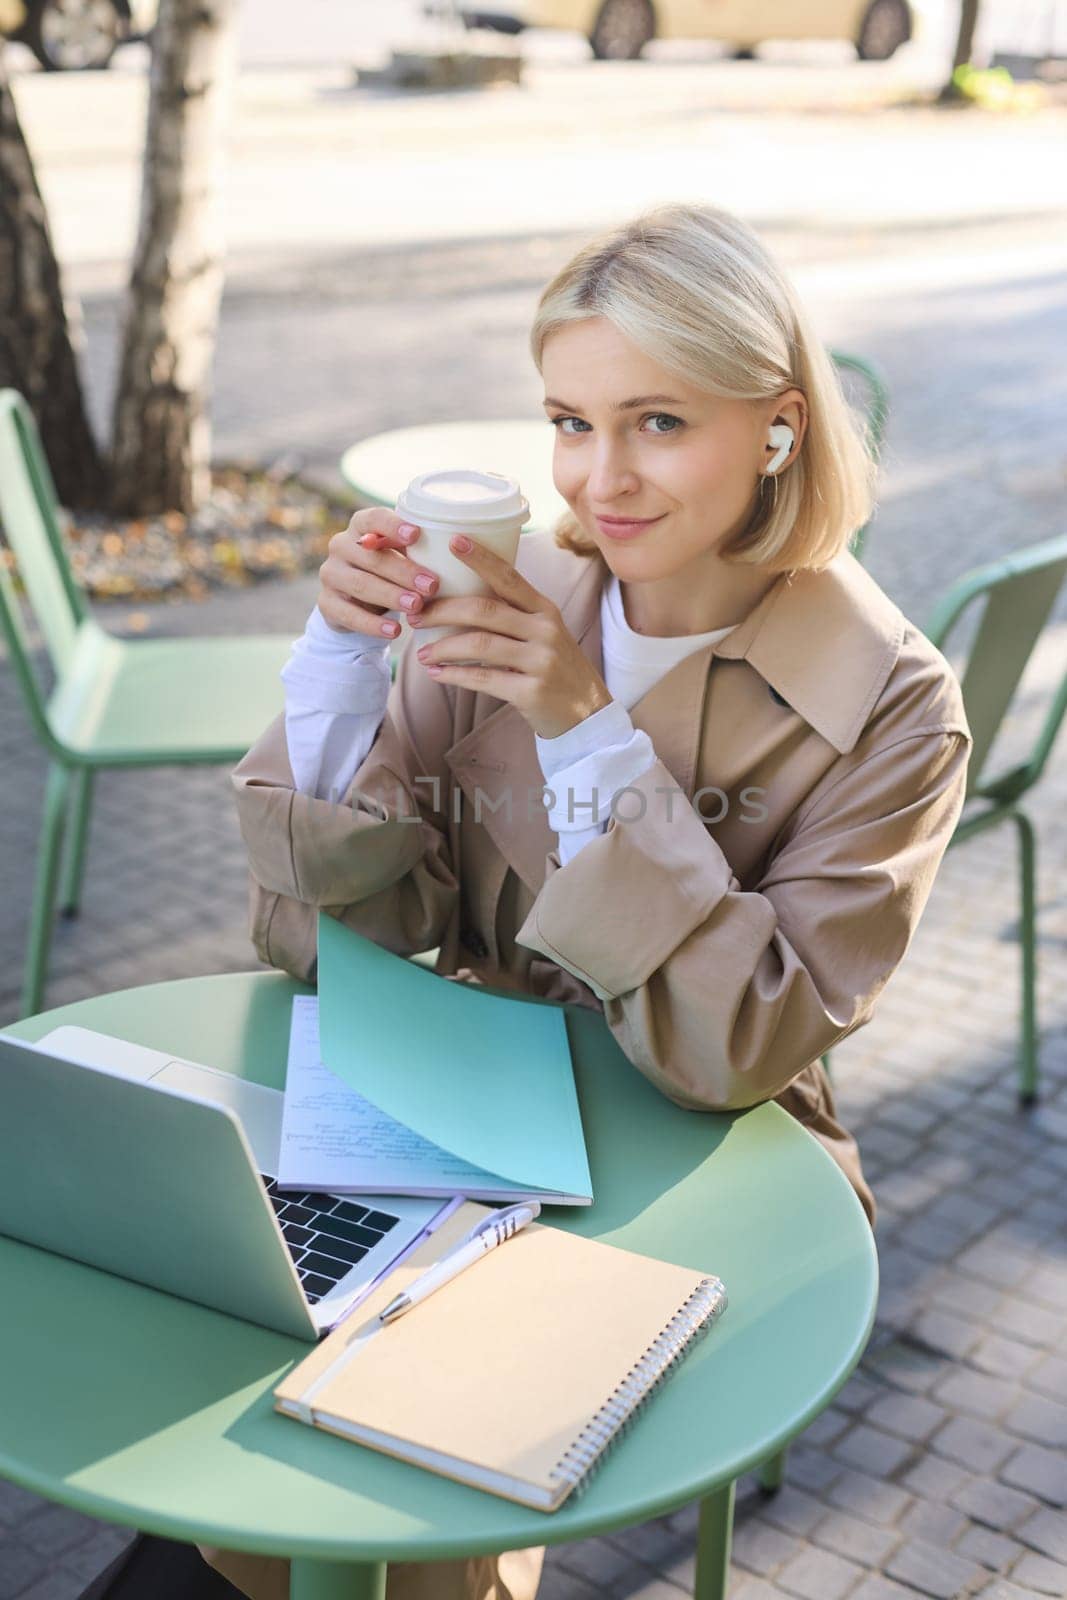 Vertical shot of cute blond woman, sitting in street cafe outdoors, wearing wireless headphones, using laptop, drinking her coffee and smiling at camera.